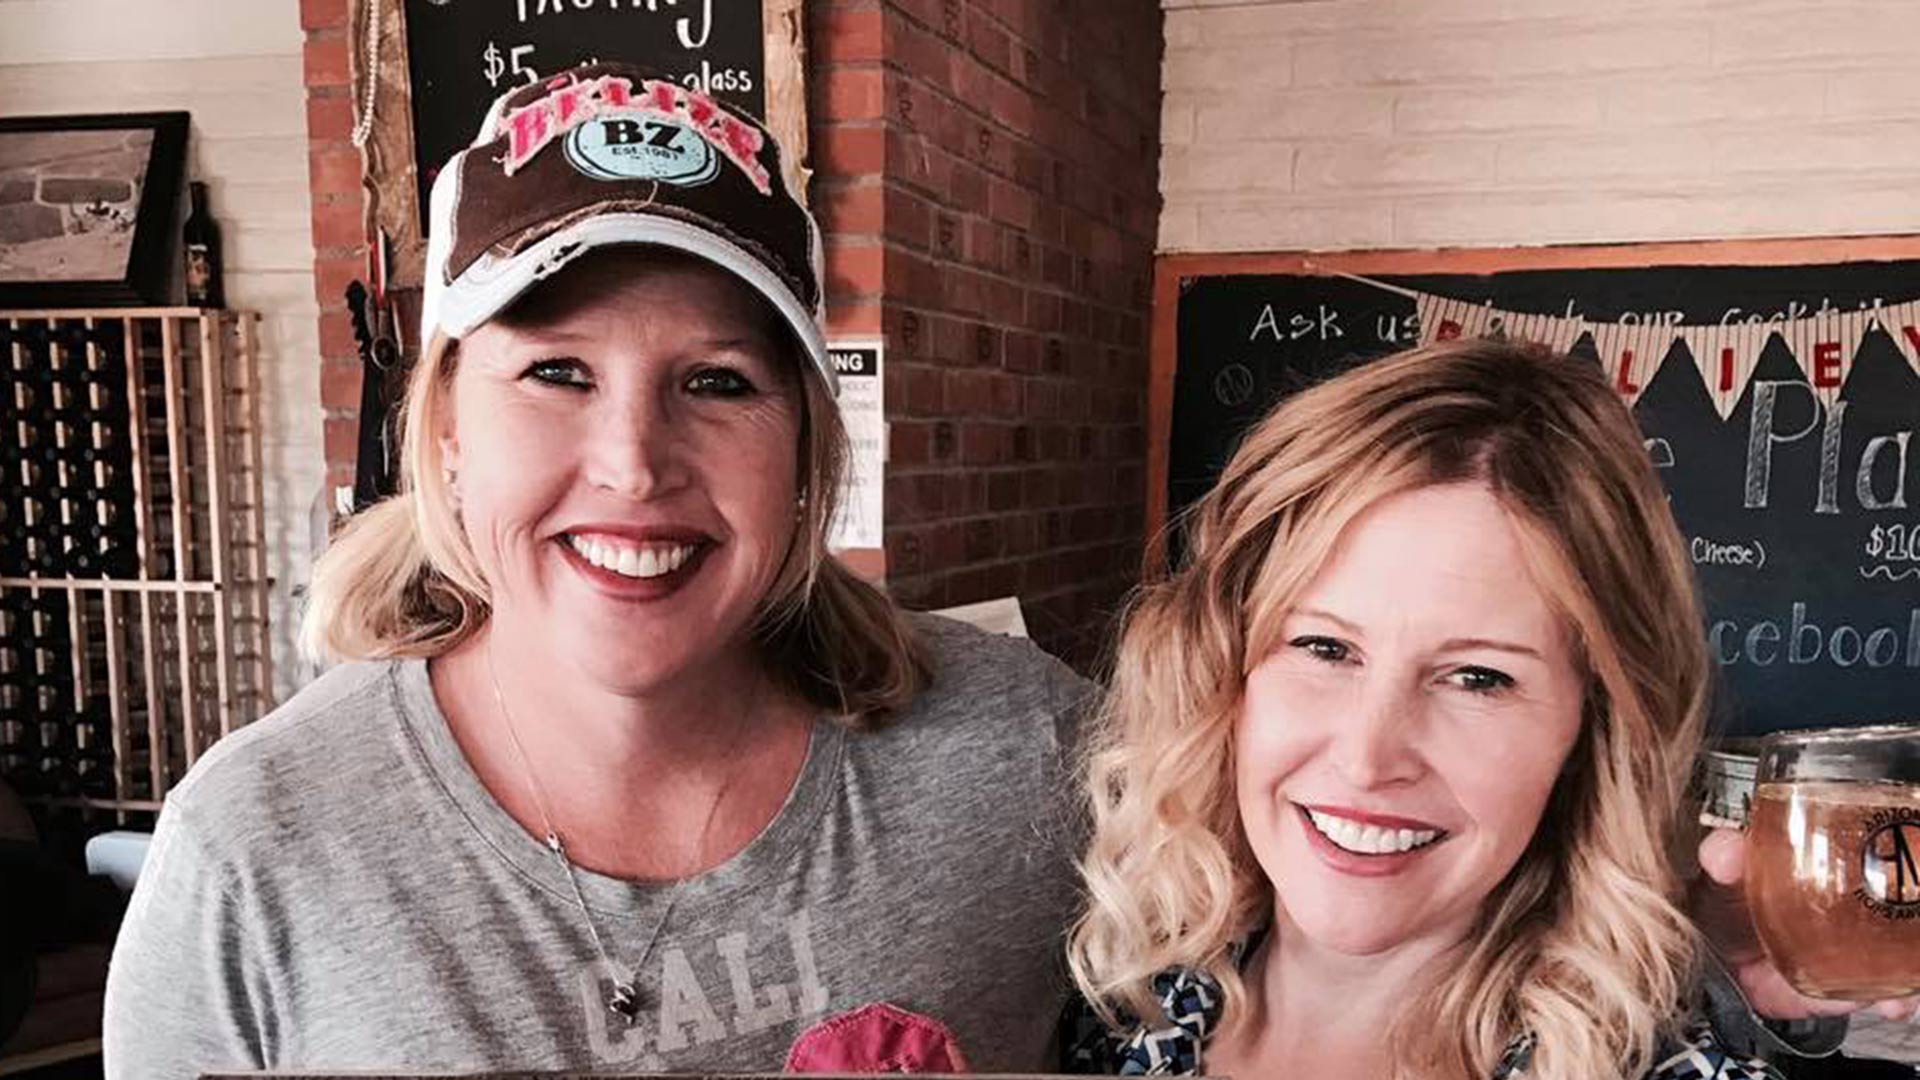 Megan Haller (left) and Shannon Zouzoulas (right) are sisters and owners of Arizona Hops and Vines winery in Sonoita.